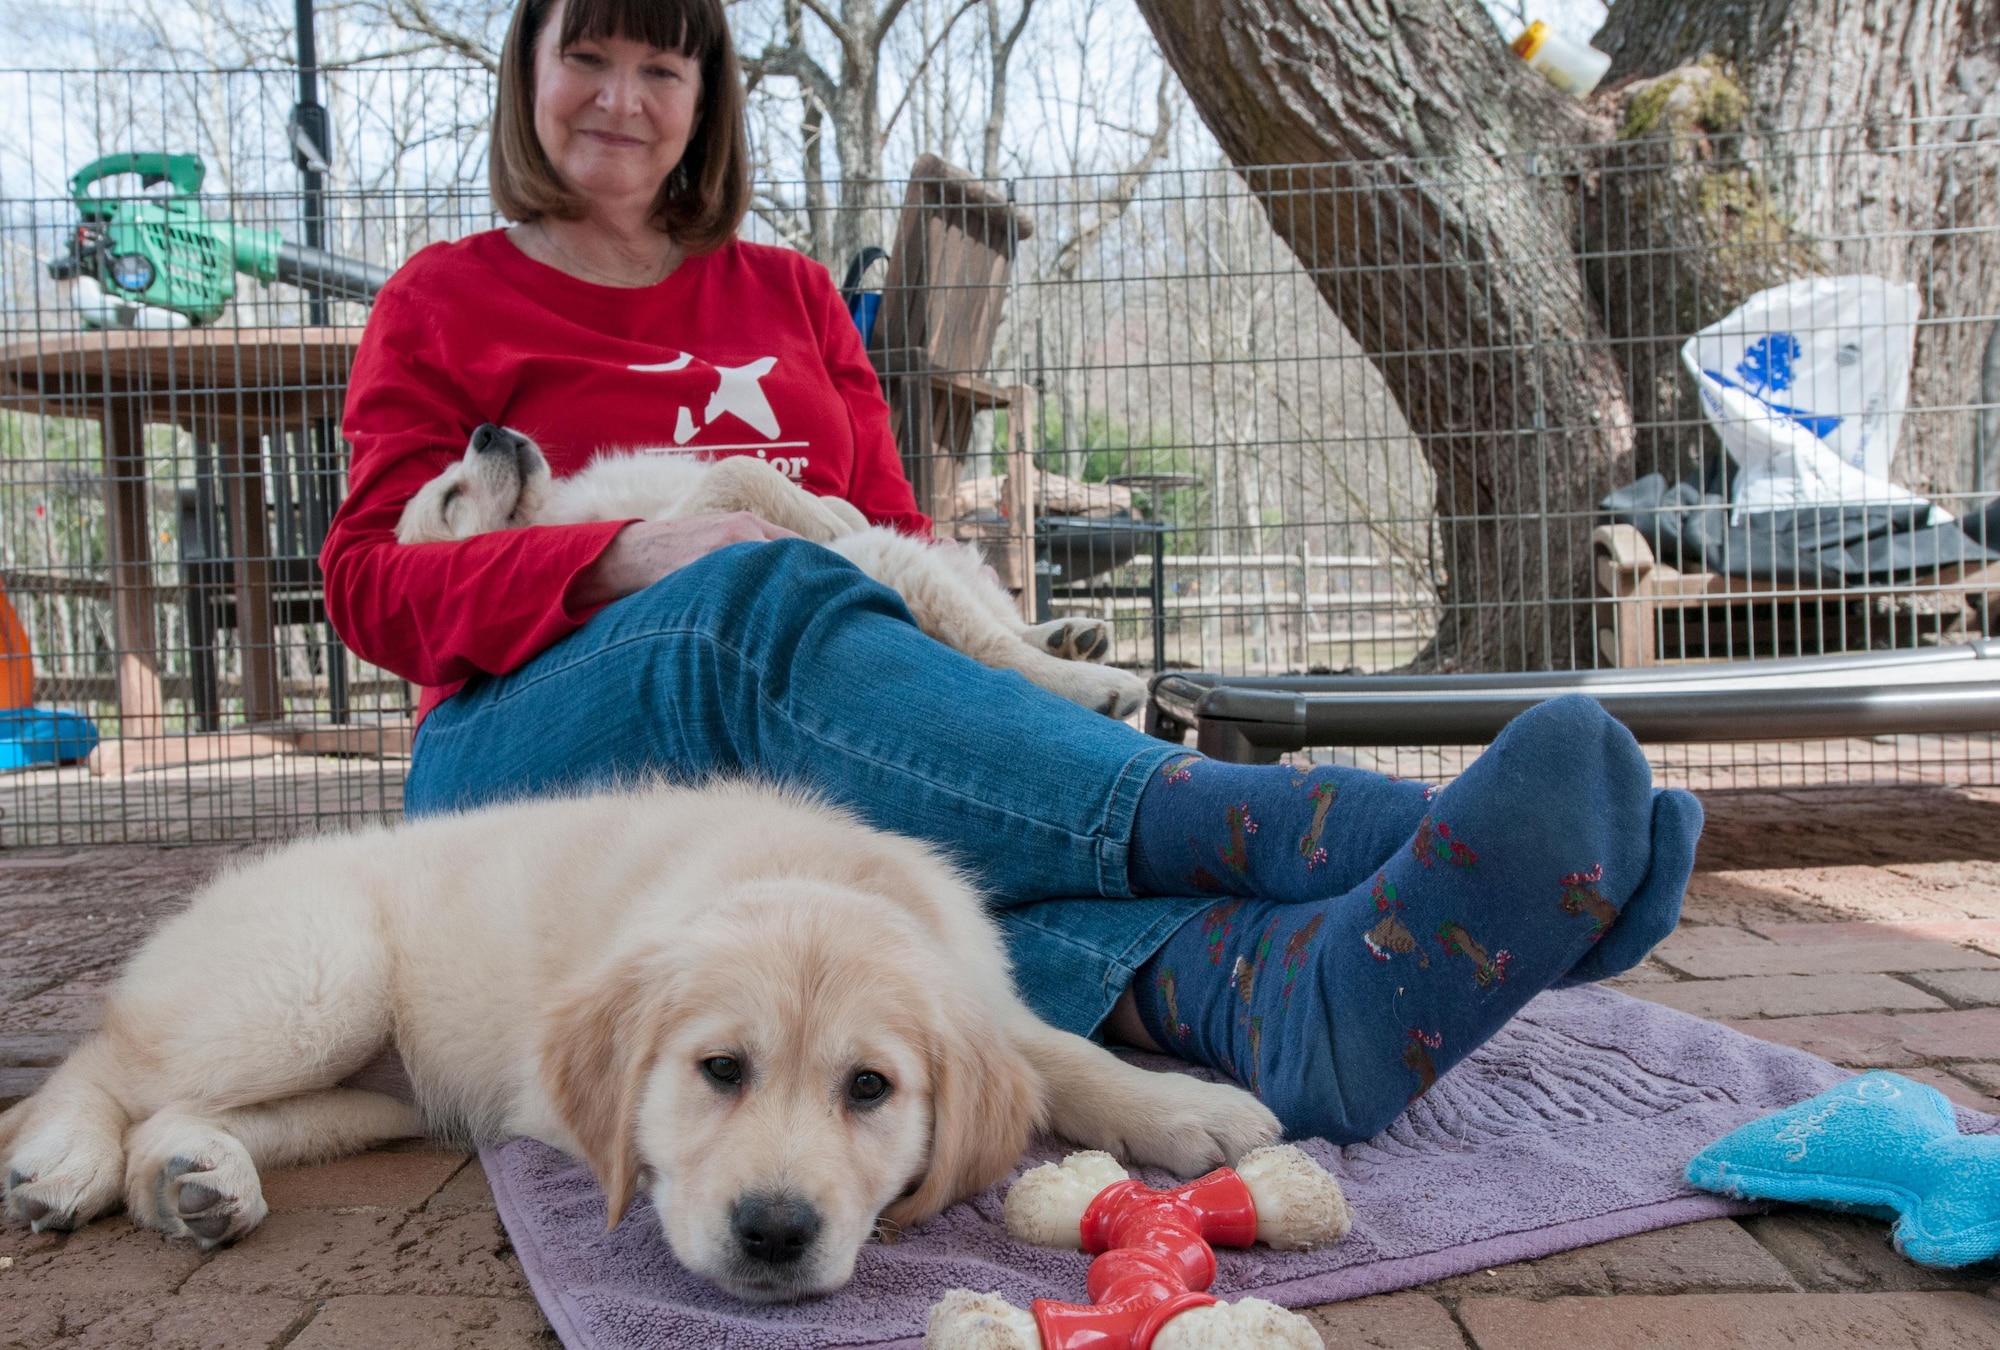 Liz Worthington, a Warrior Canine Connection volunteer, spends time with two golden retriever puppies at one of the nonprofit’s sites in Brookville, Md., March 11, 2016. Before puppies embark on a two-year training program, they get plenty of human interaction so they can be a friendly service dog for wounded warriors. (U.S. Air Force photo/Sean Kimmons) 